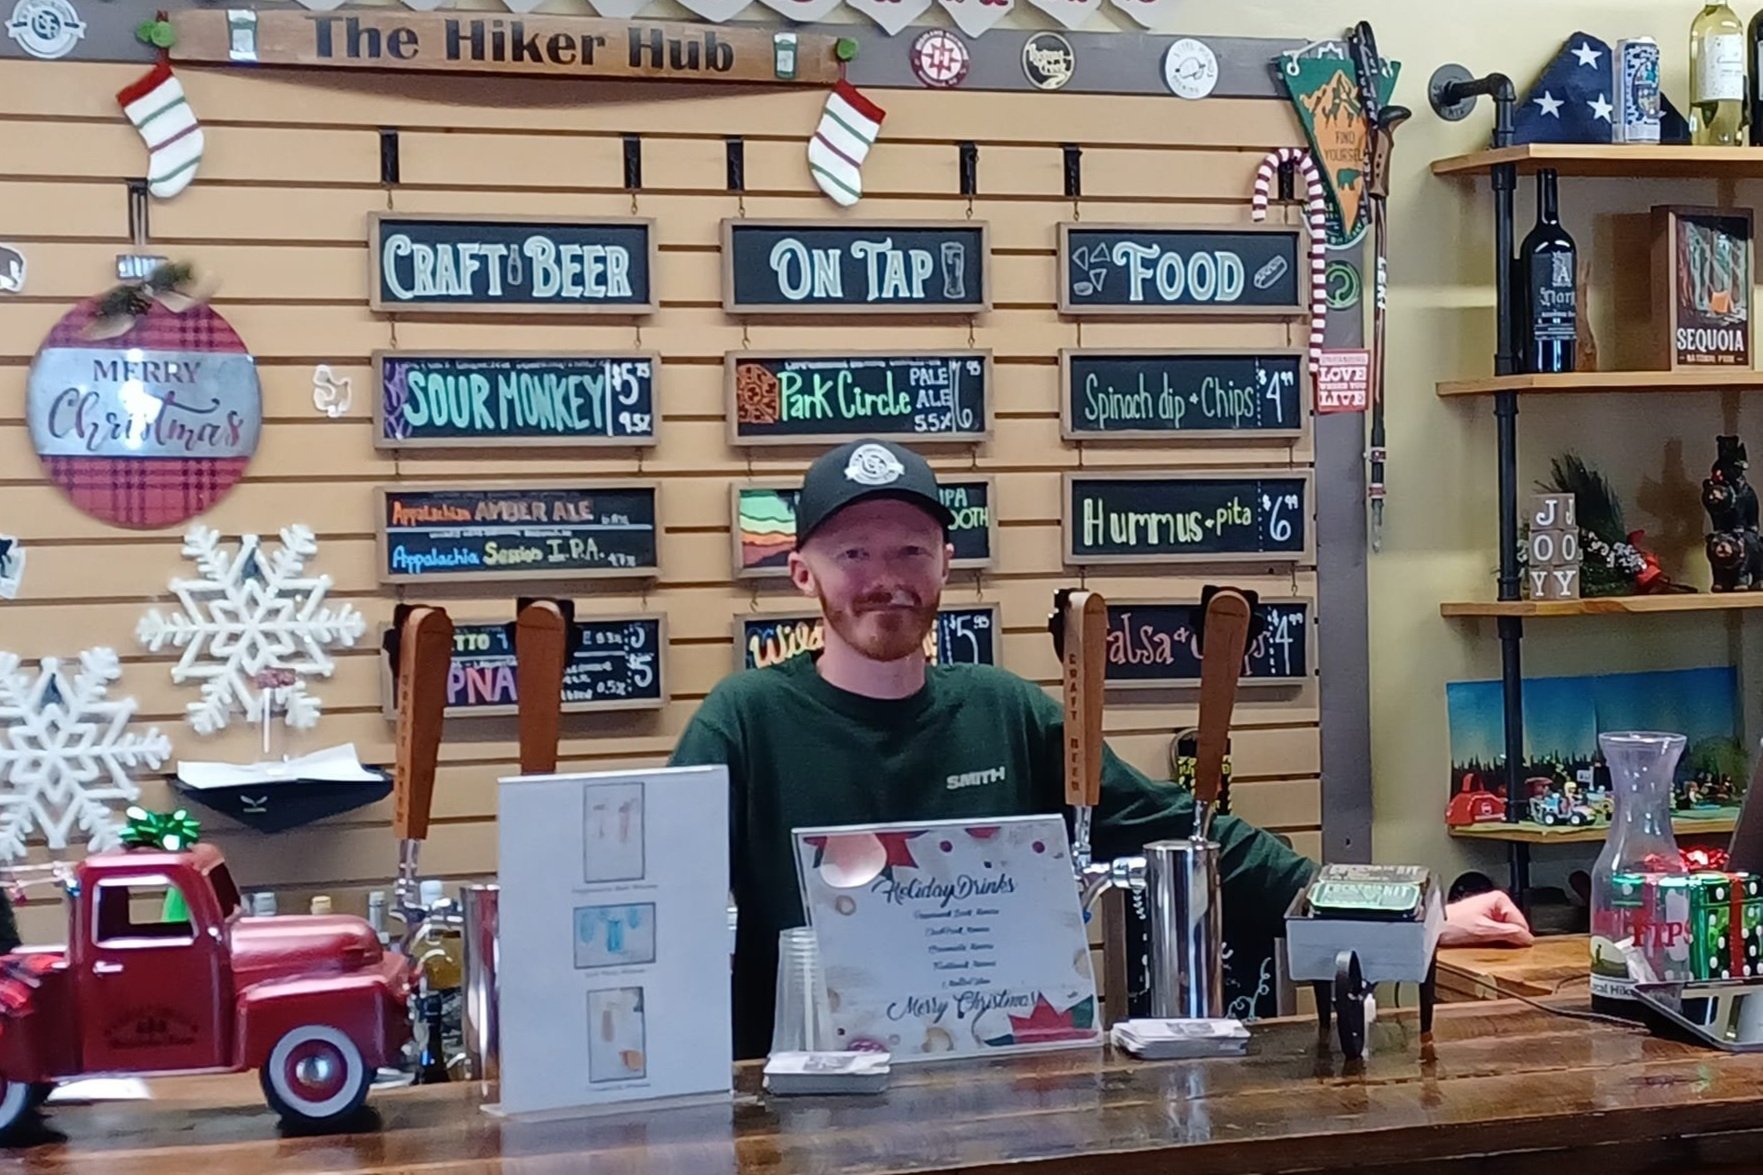 The Hiker Hub at The Local Hiker